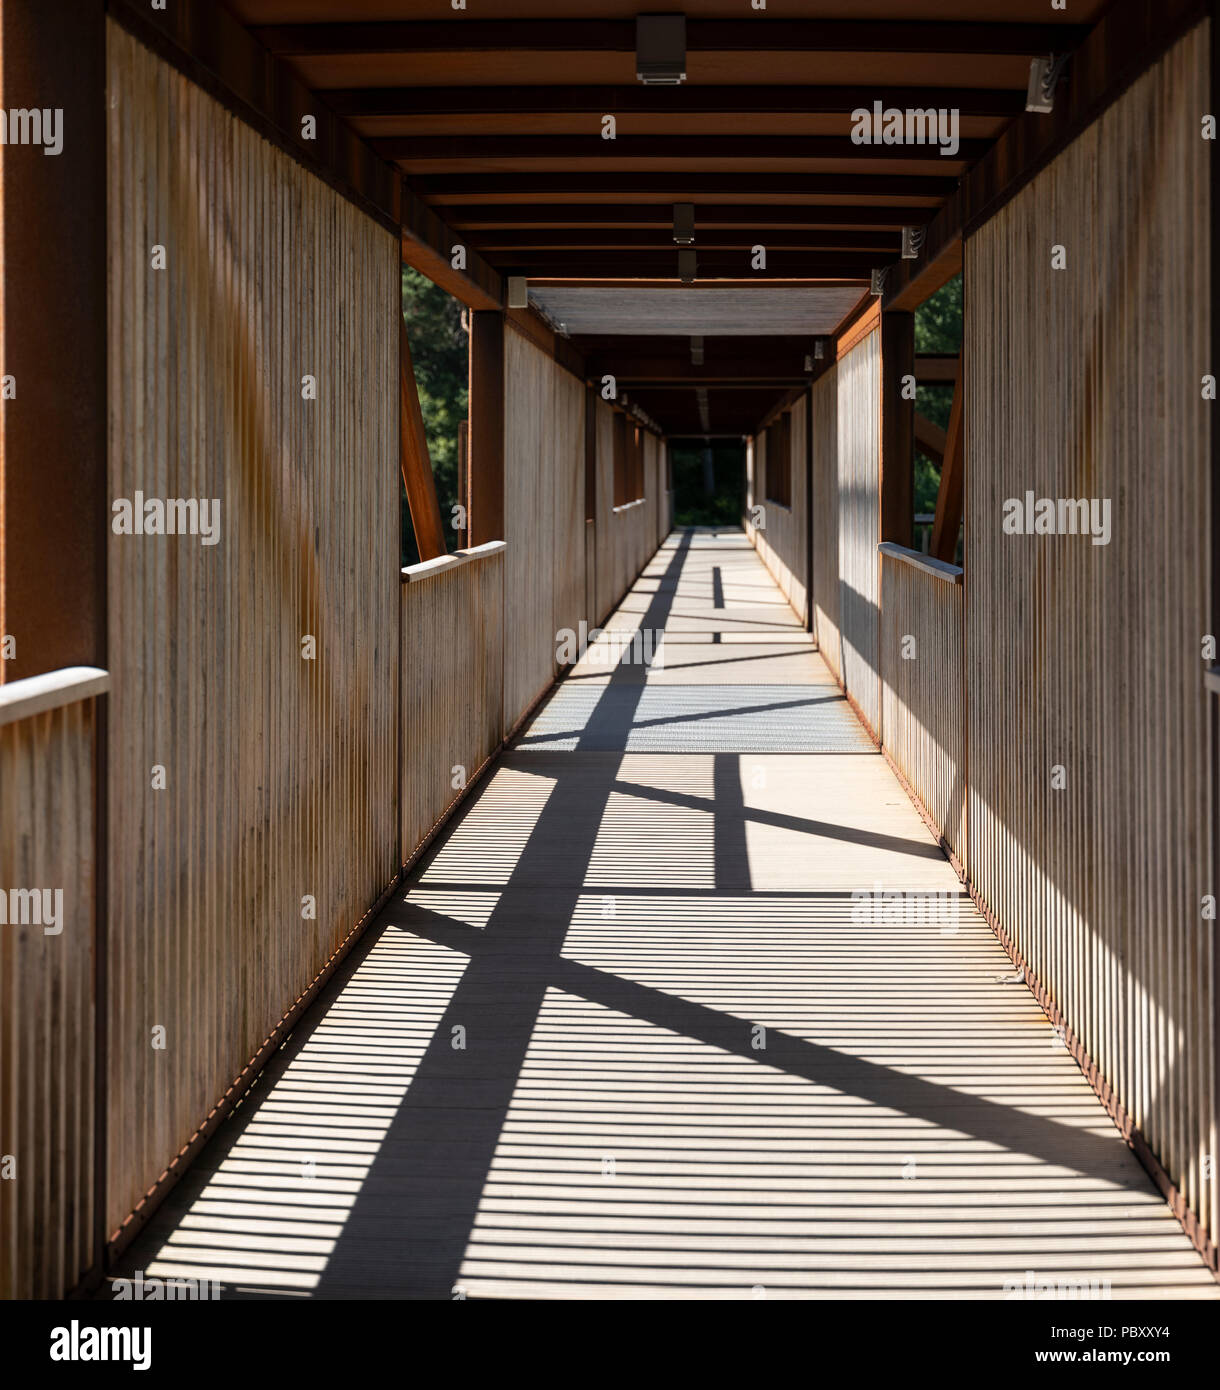 A covered wooden pedestrian and cyclist bridge in Norway Stock Photo